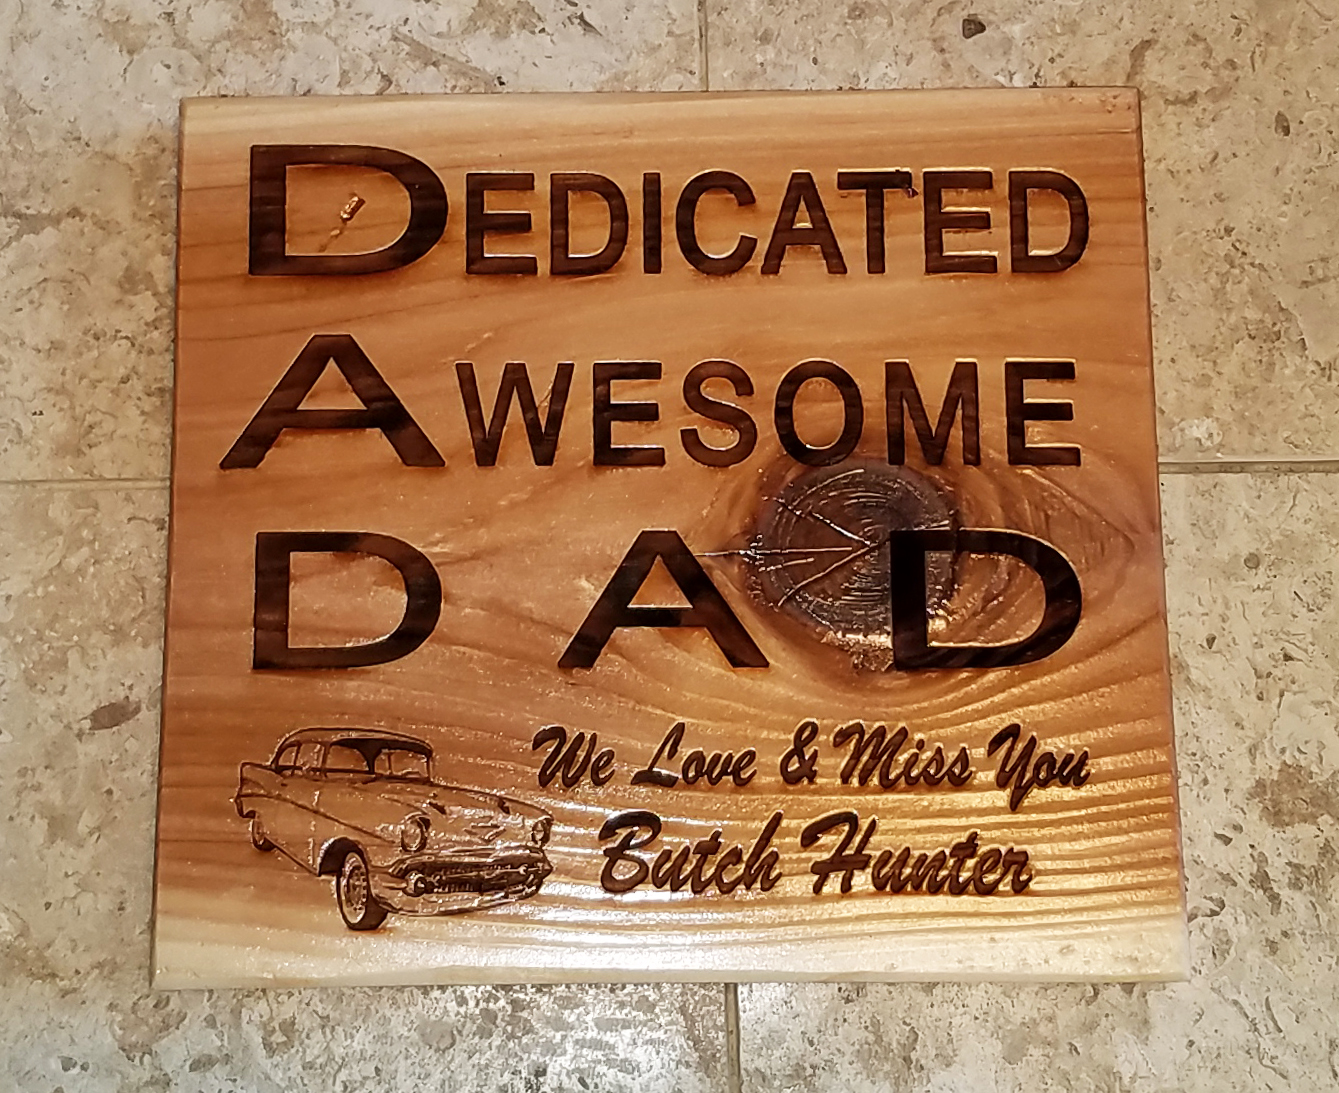 Personalized Design By Custom Laser Art Designs.  It is a laser engraved wooden memorial plaque.  The saying is:  Dedicated Awesome DAD, We Love & Miss You